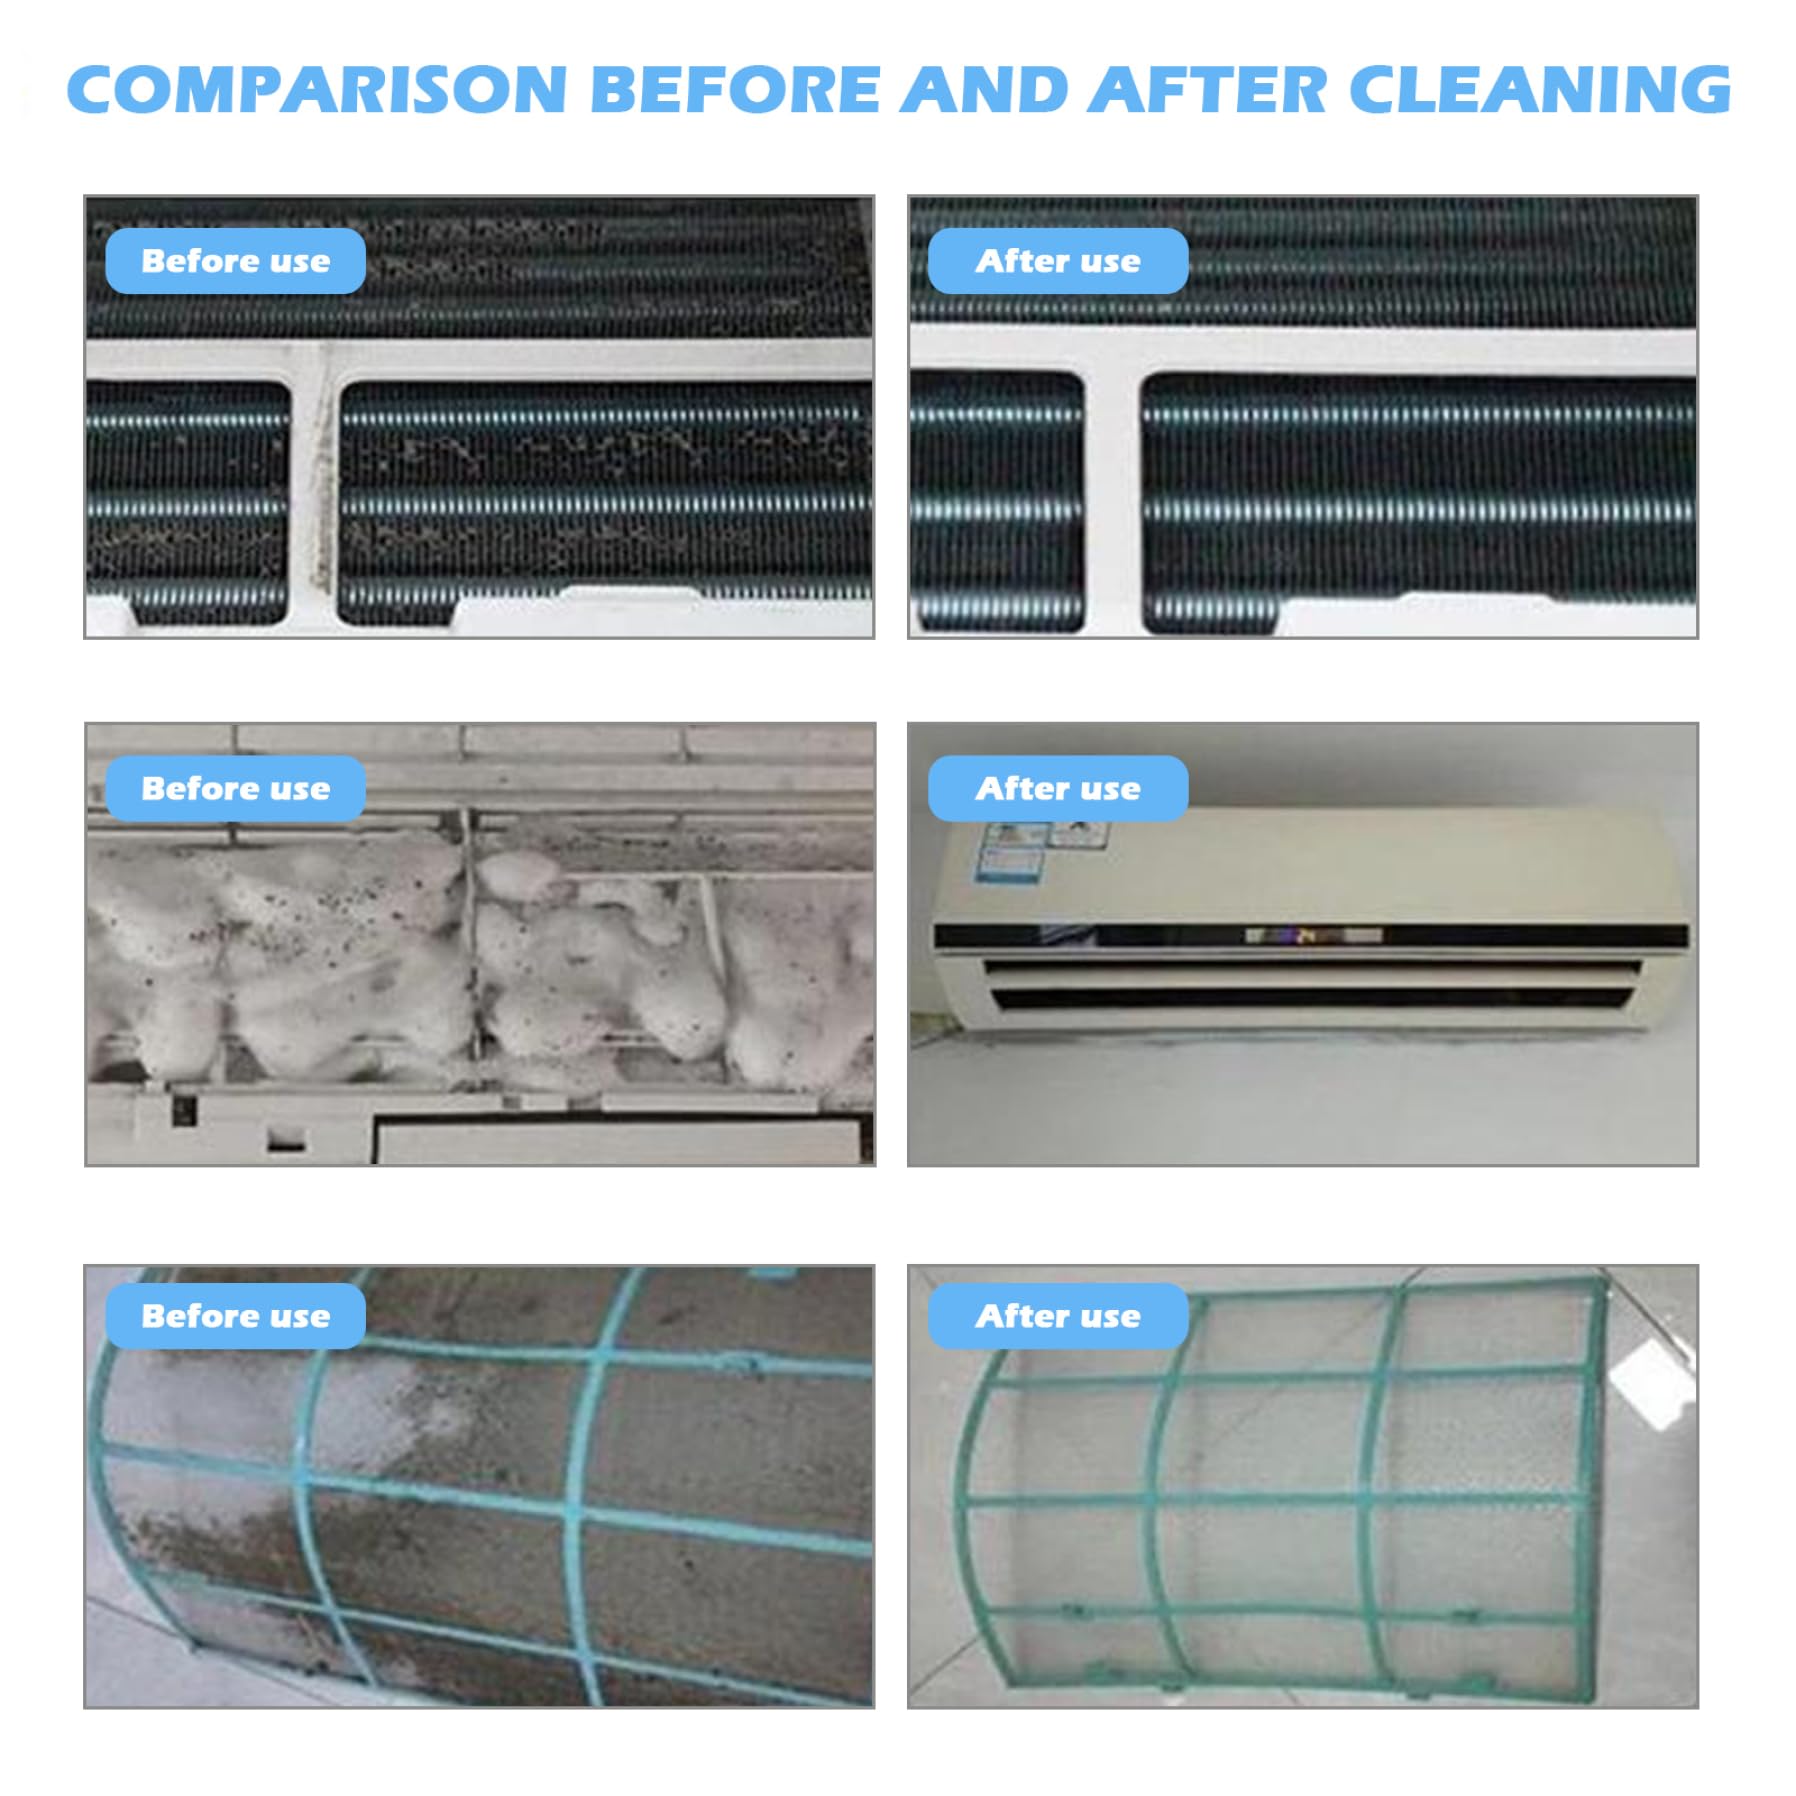 Air Conditioner Cleaning Kit, Air Conditioner Cleaning Kit for 37-45in 12PCS Waterproof Wall Mounted Air Conditioner Bag with Drain Outlet Pipe Minisplit Cleaning Kit